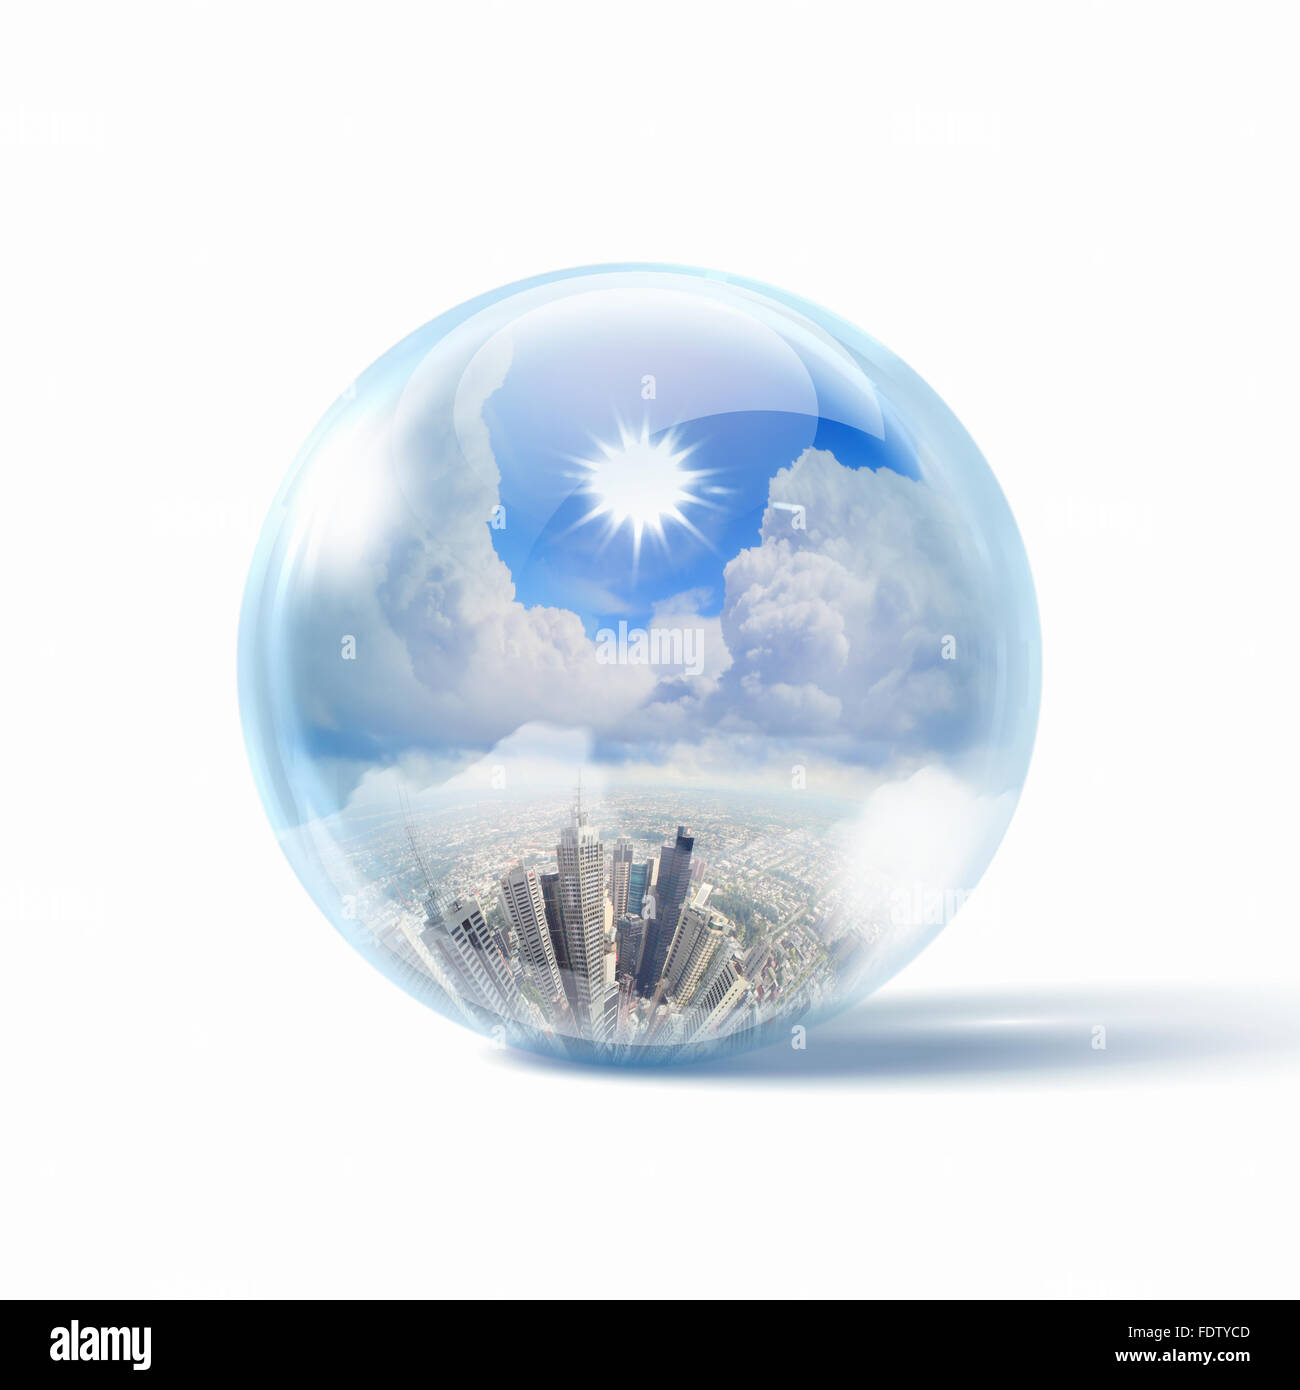 Image of a modern cityscape inside a glass sphere Stock Photo